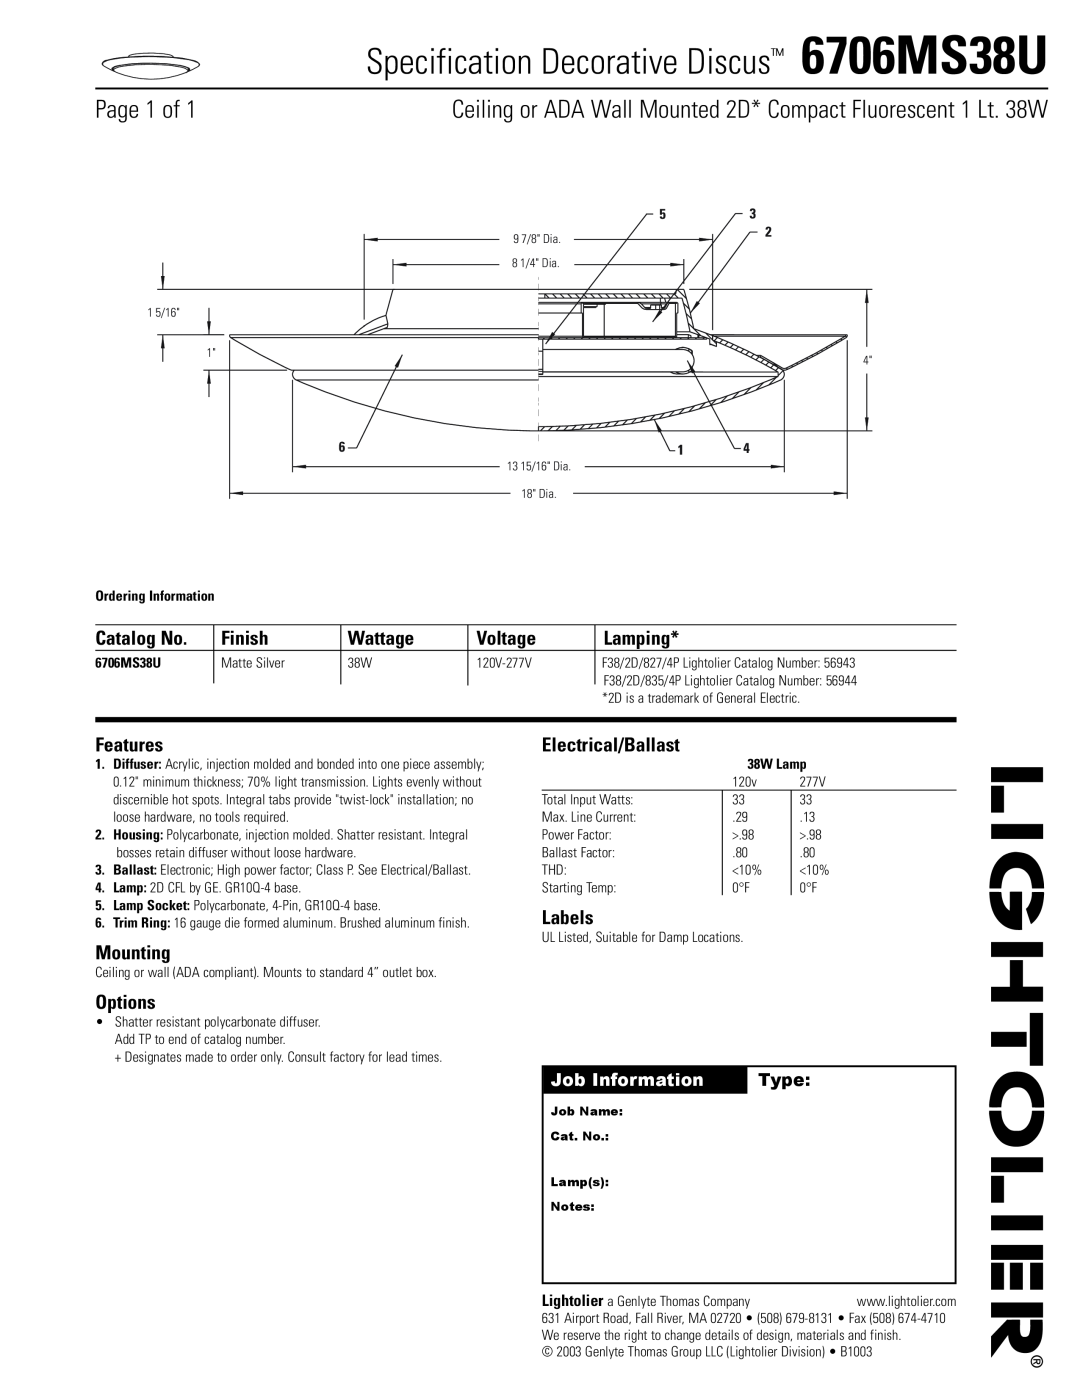 Lightolier manual Specification Decorative Discus 6706MS38U, Page 1 of, Catalog No, Finish, Wattage, Voltage, Lamping 